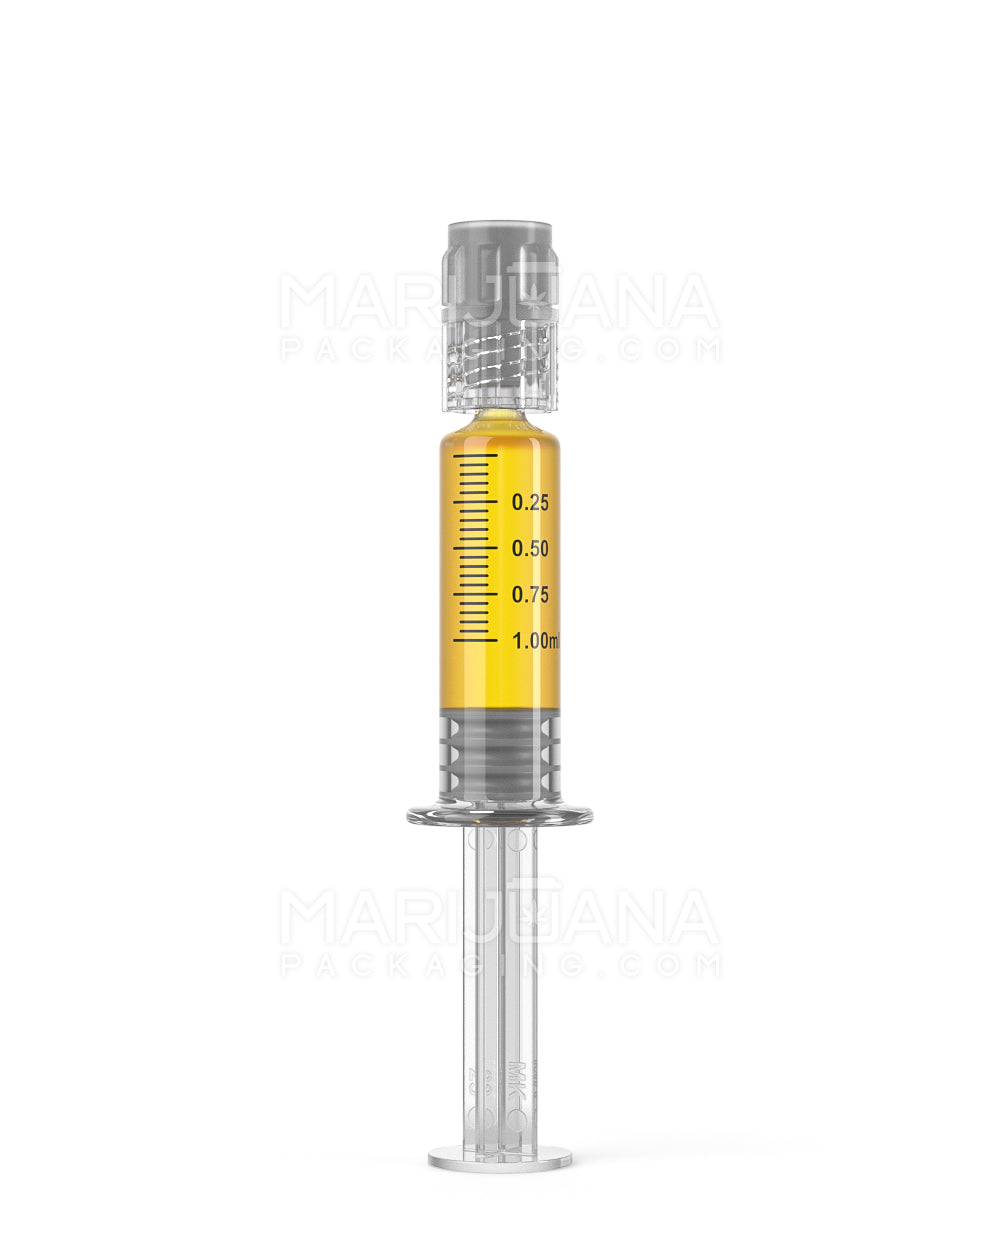 Luer Lock | Glass Dab Applicator Syringes | 1mL - 0.25mL Increments - 100 Count - 2